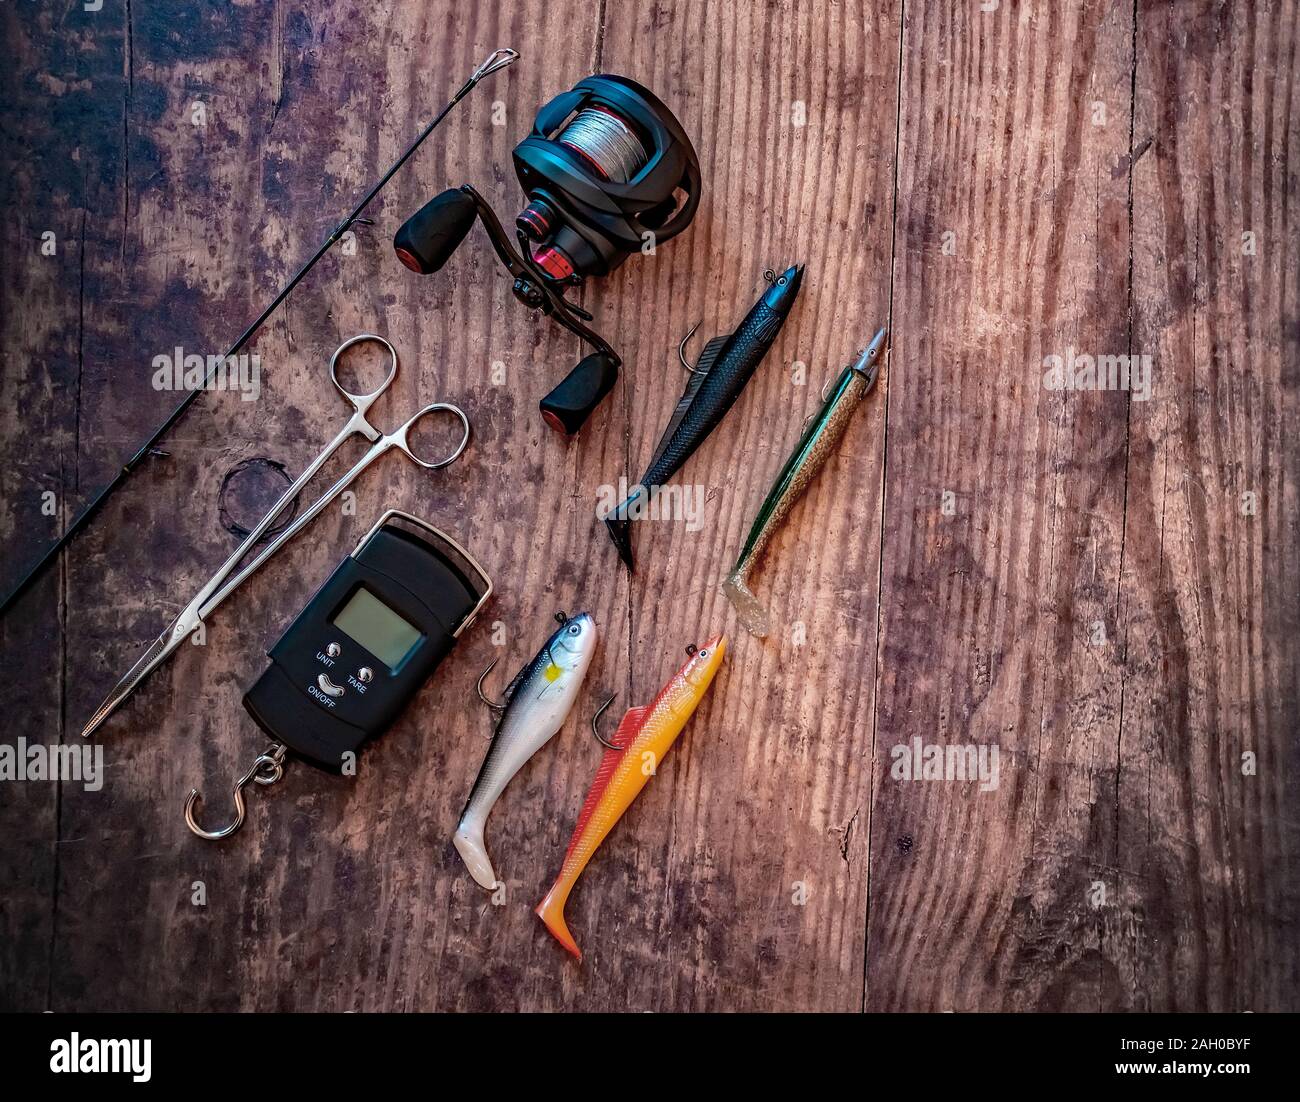 Flat lay of bass lure fishing tackle on a plain wooden background Stock  Photo - Alamy